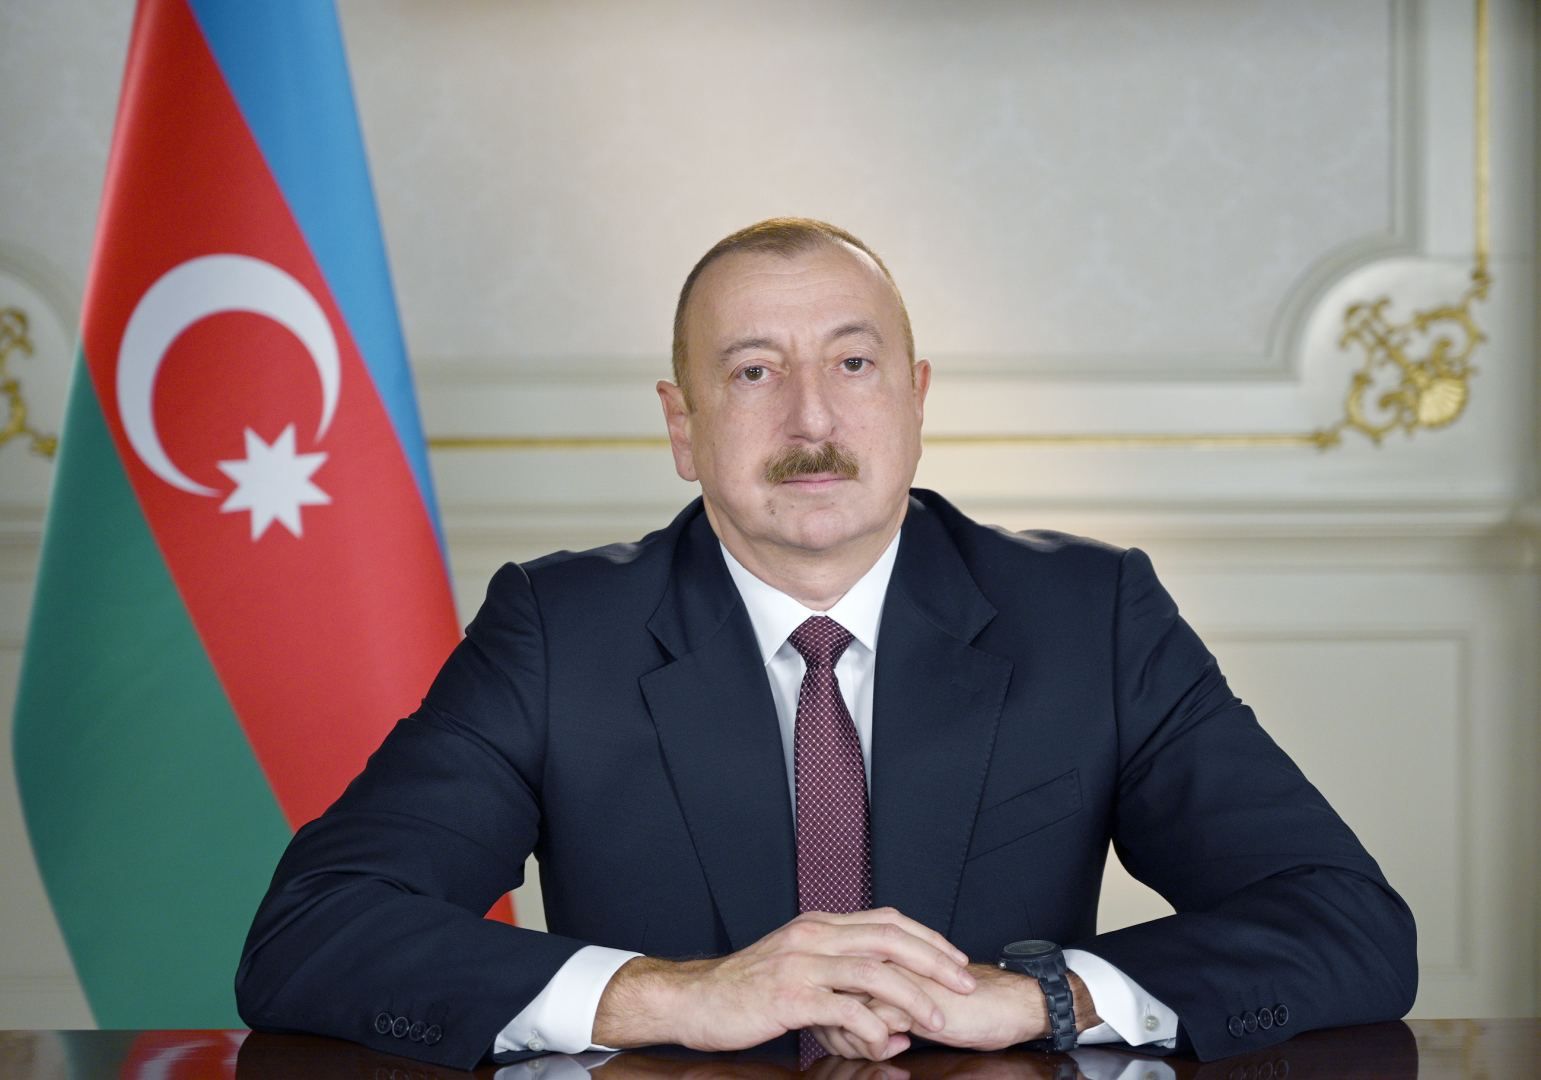 Official reception was hosted in honor of President Ilham Aliyev